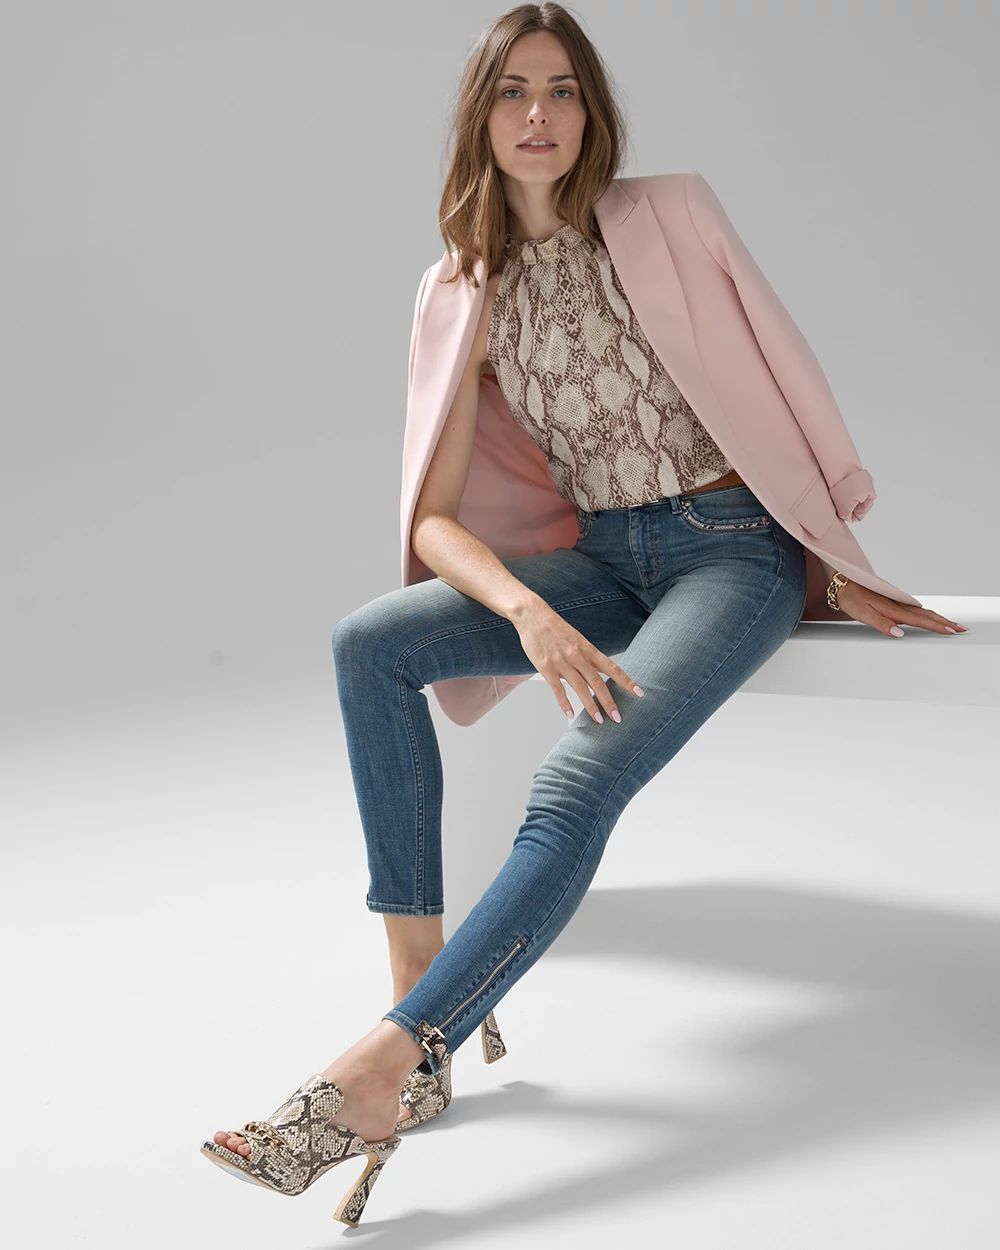 Petite Mid-Rise Everyday Soft Denim  Python Trim Skinny Jeans click to view larger image.